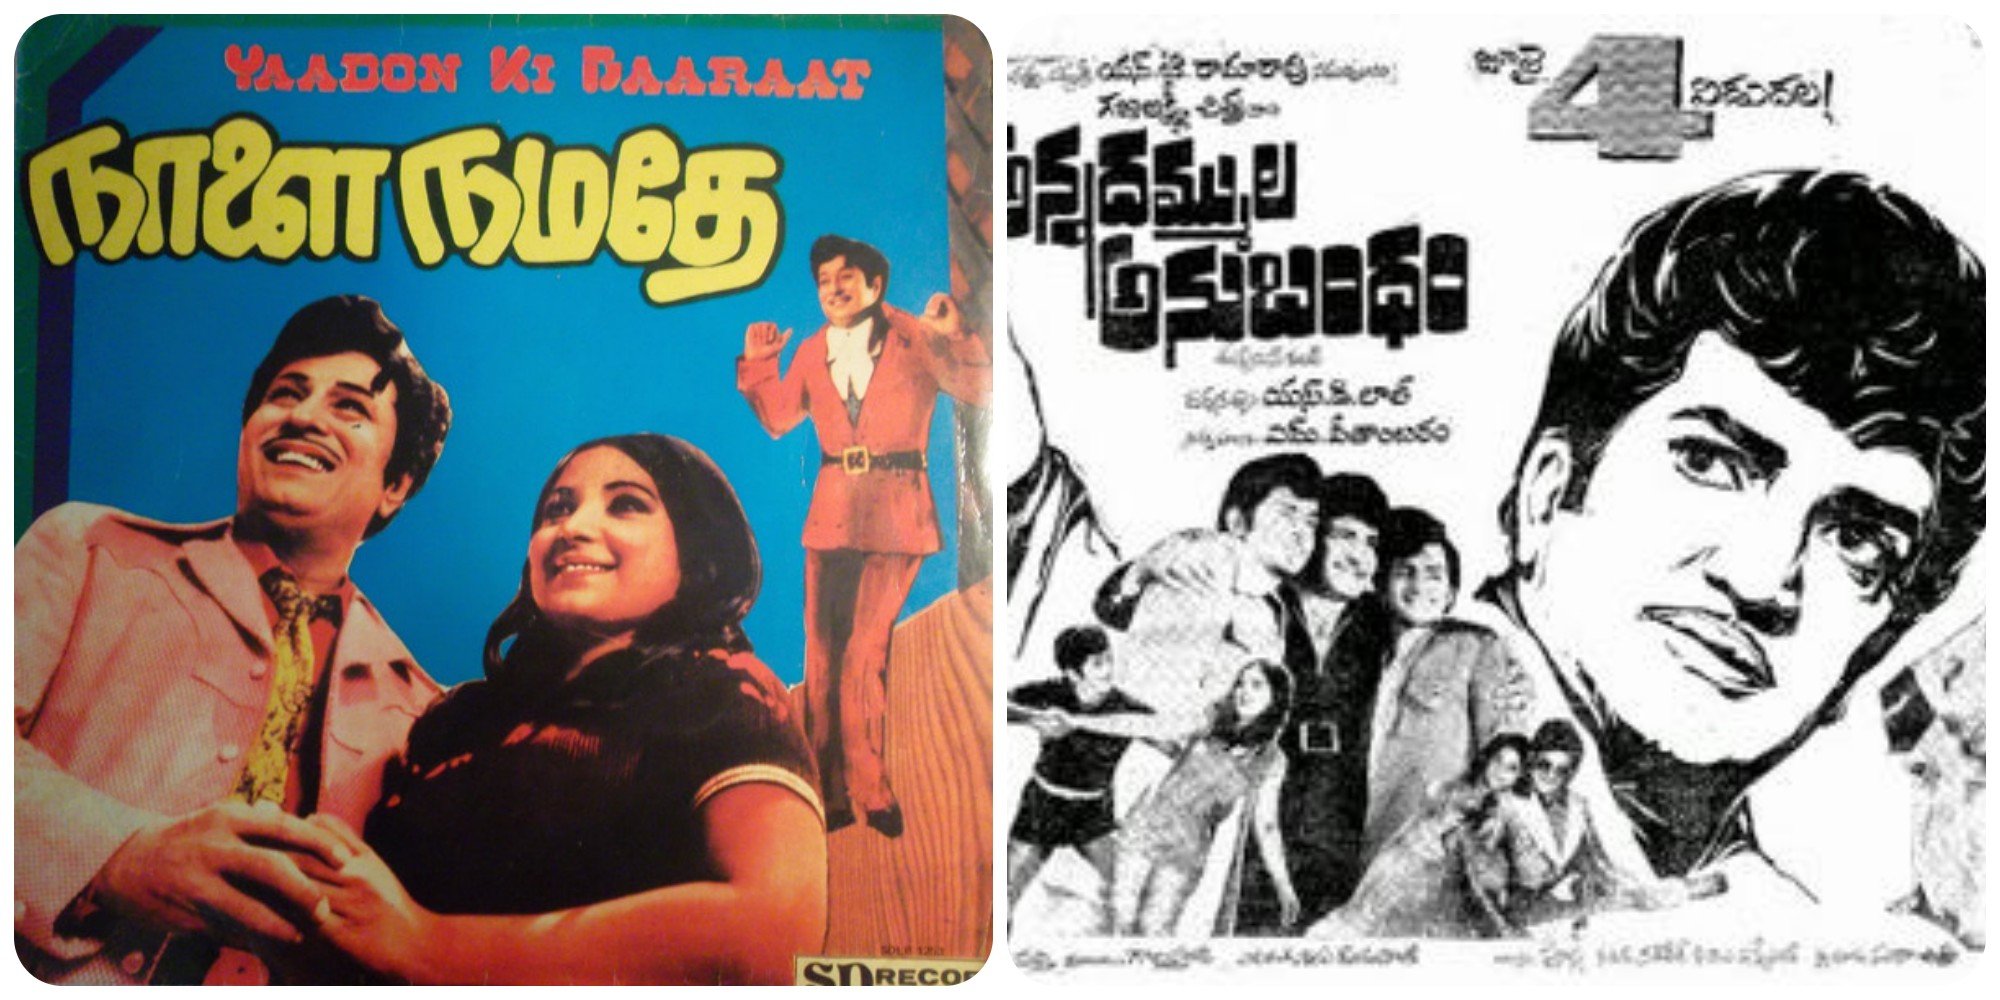 Bollywood Movies Remade In South India